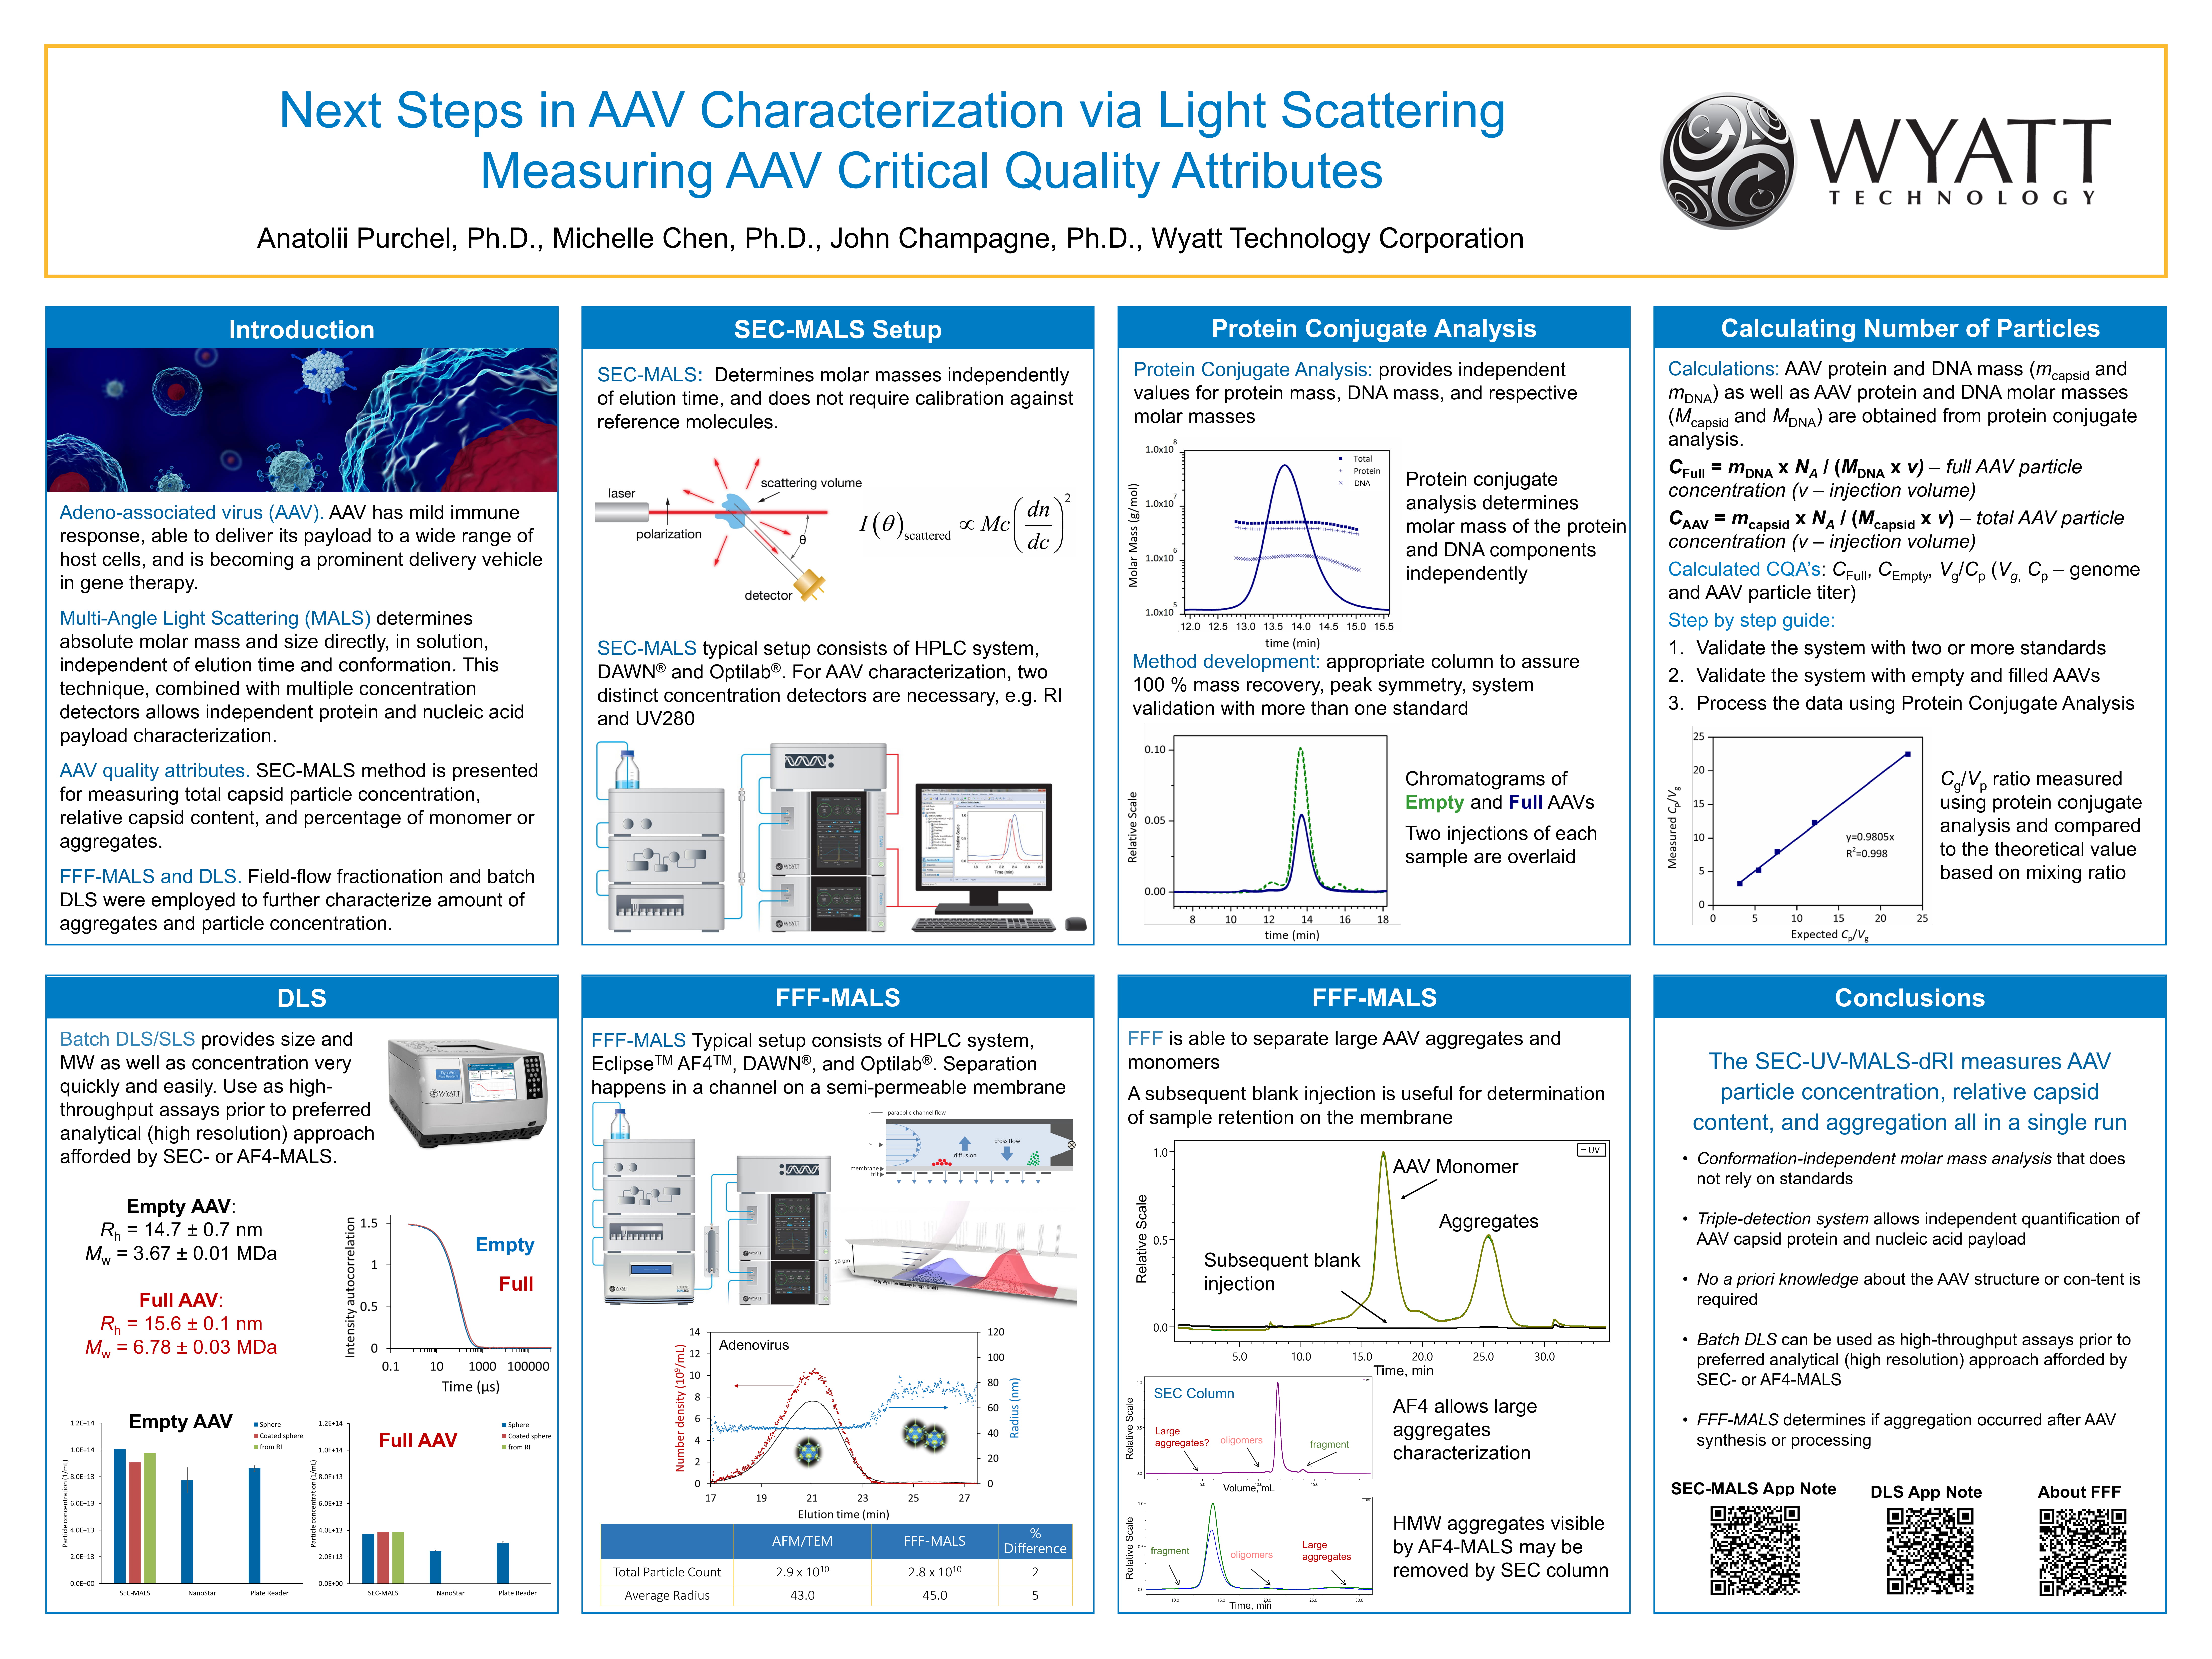 Next Steps in AAV Characterization via Light Scattering Measuring AAV Critical Quality Attributes-1.jpg